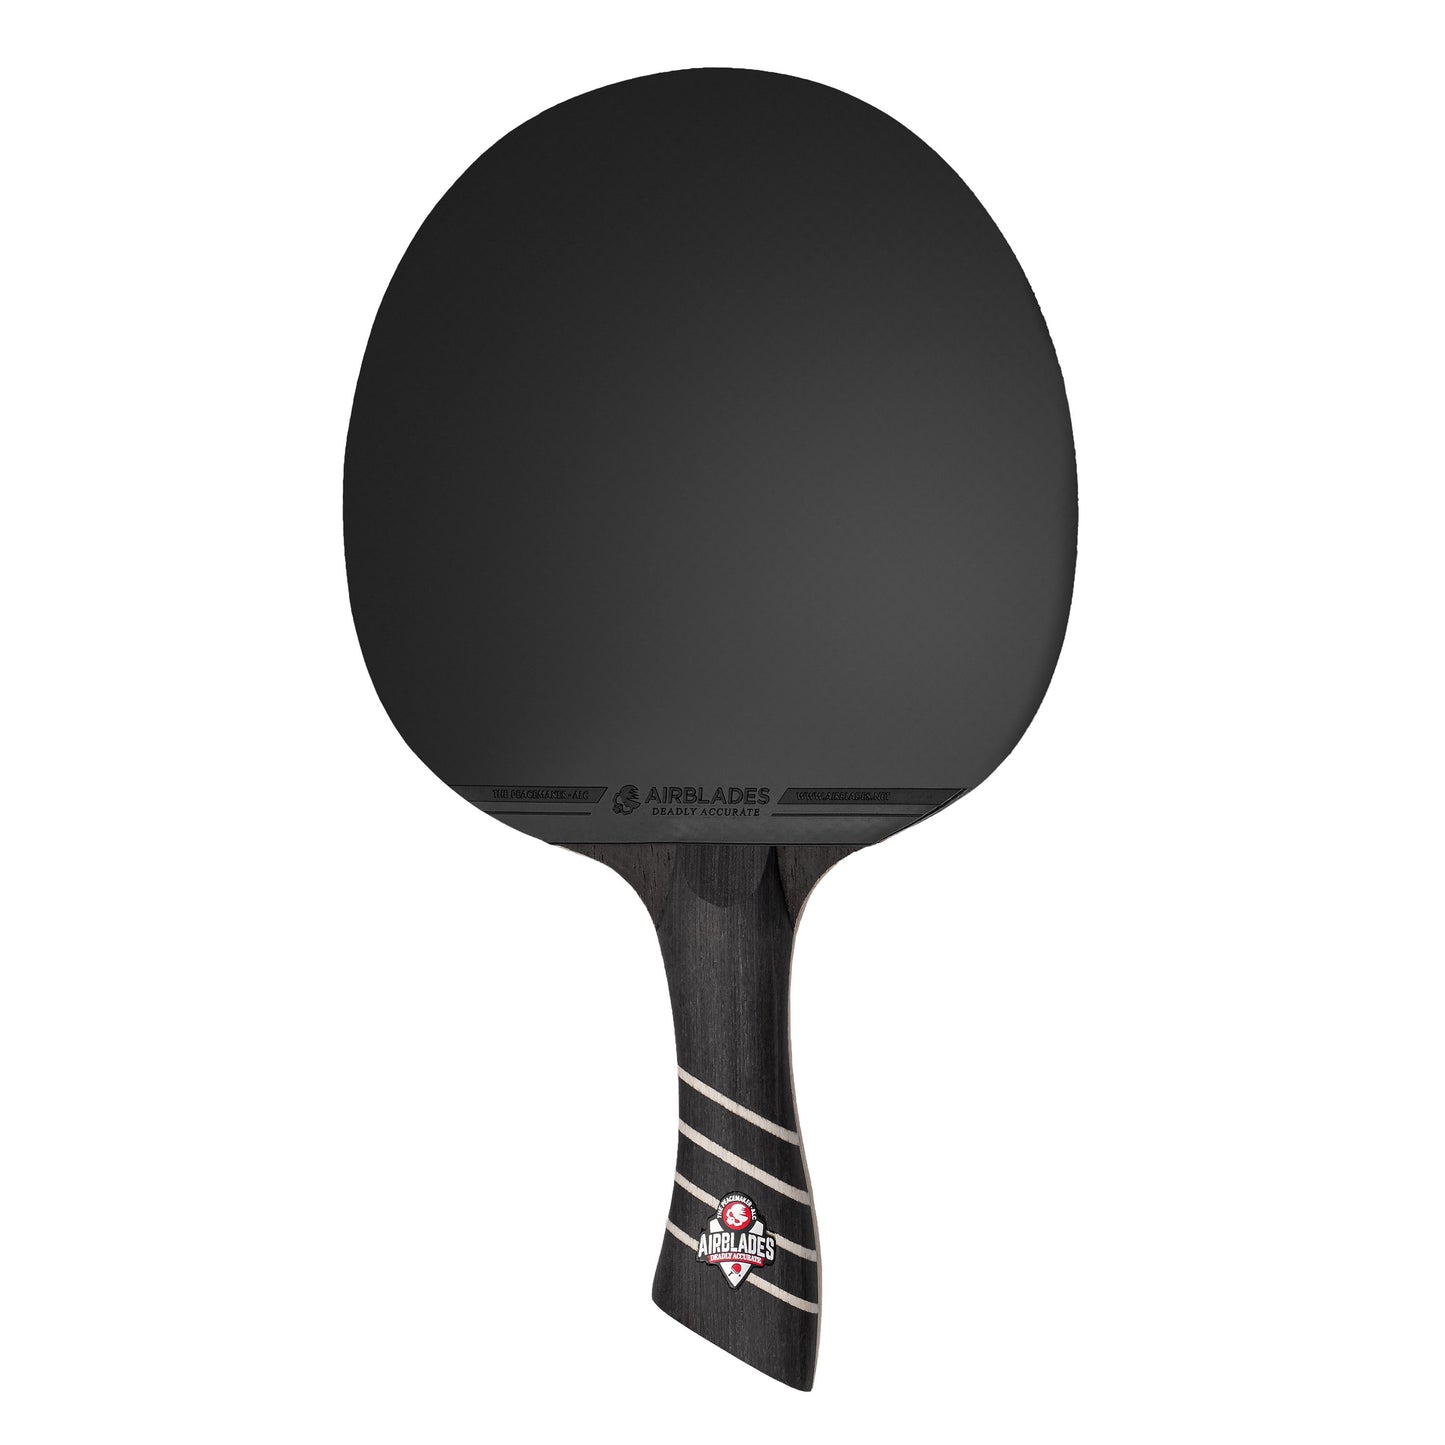 The Peacemaker - ALC Professional Ping Pong Paddle. Table Tennis Racket with Hard Carry Case & Ergonomic Handle, 7 Ply Blades of Wood with Carbon Fiber Inner Blades